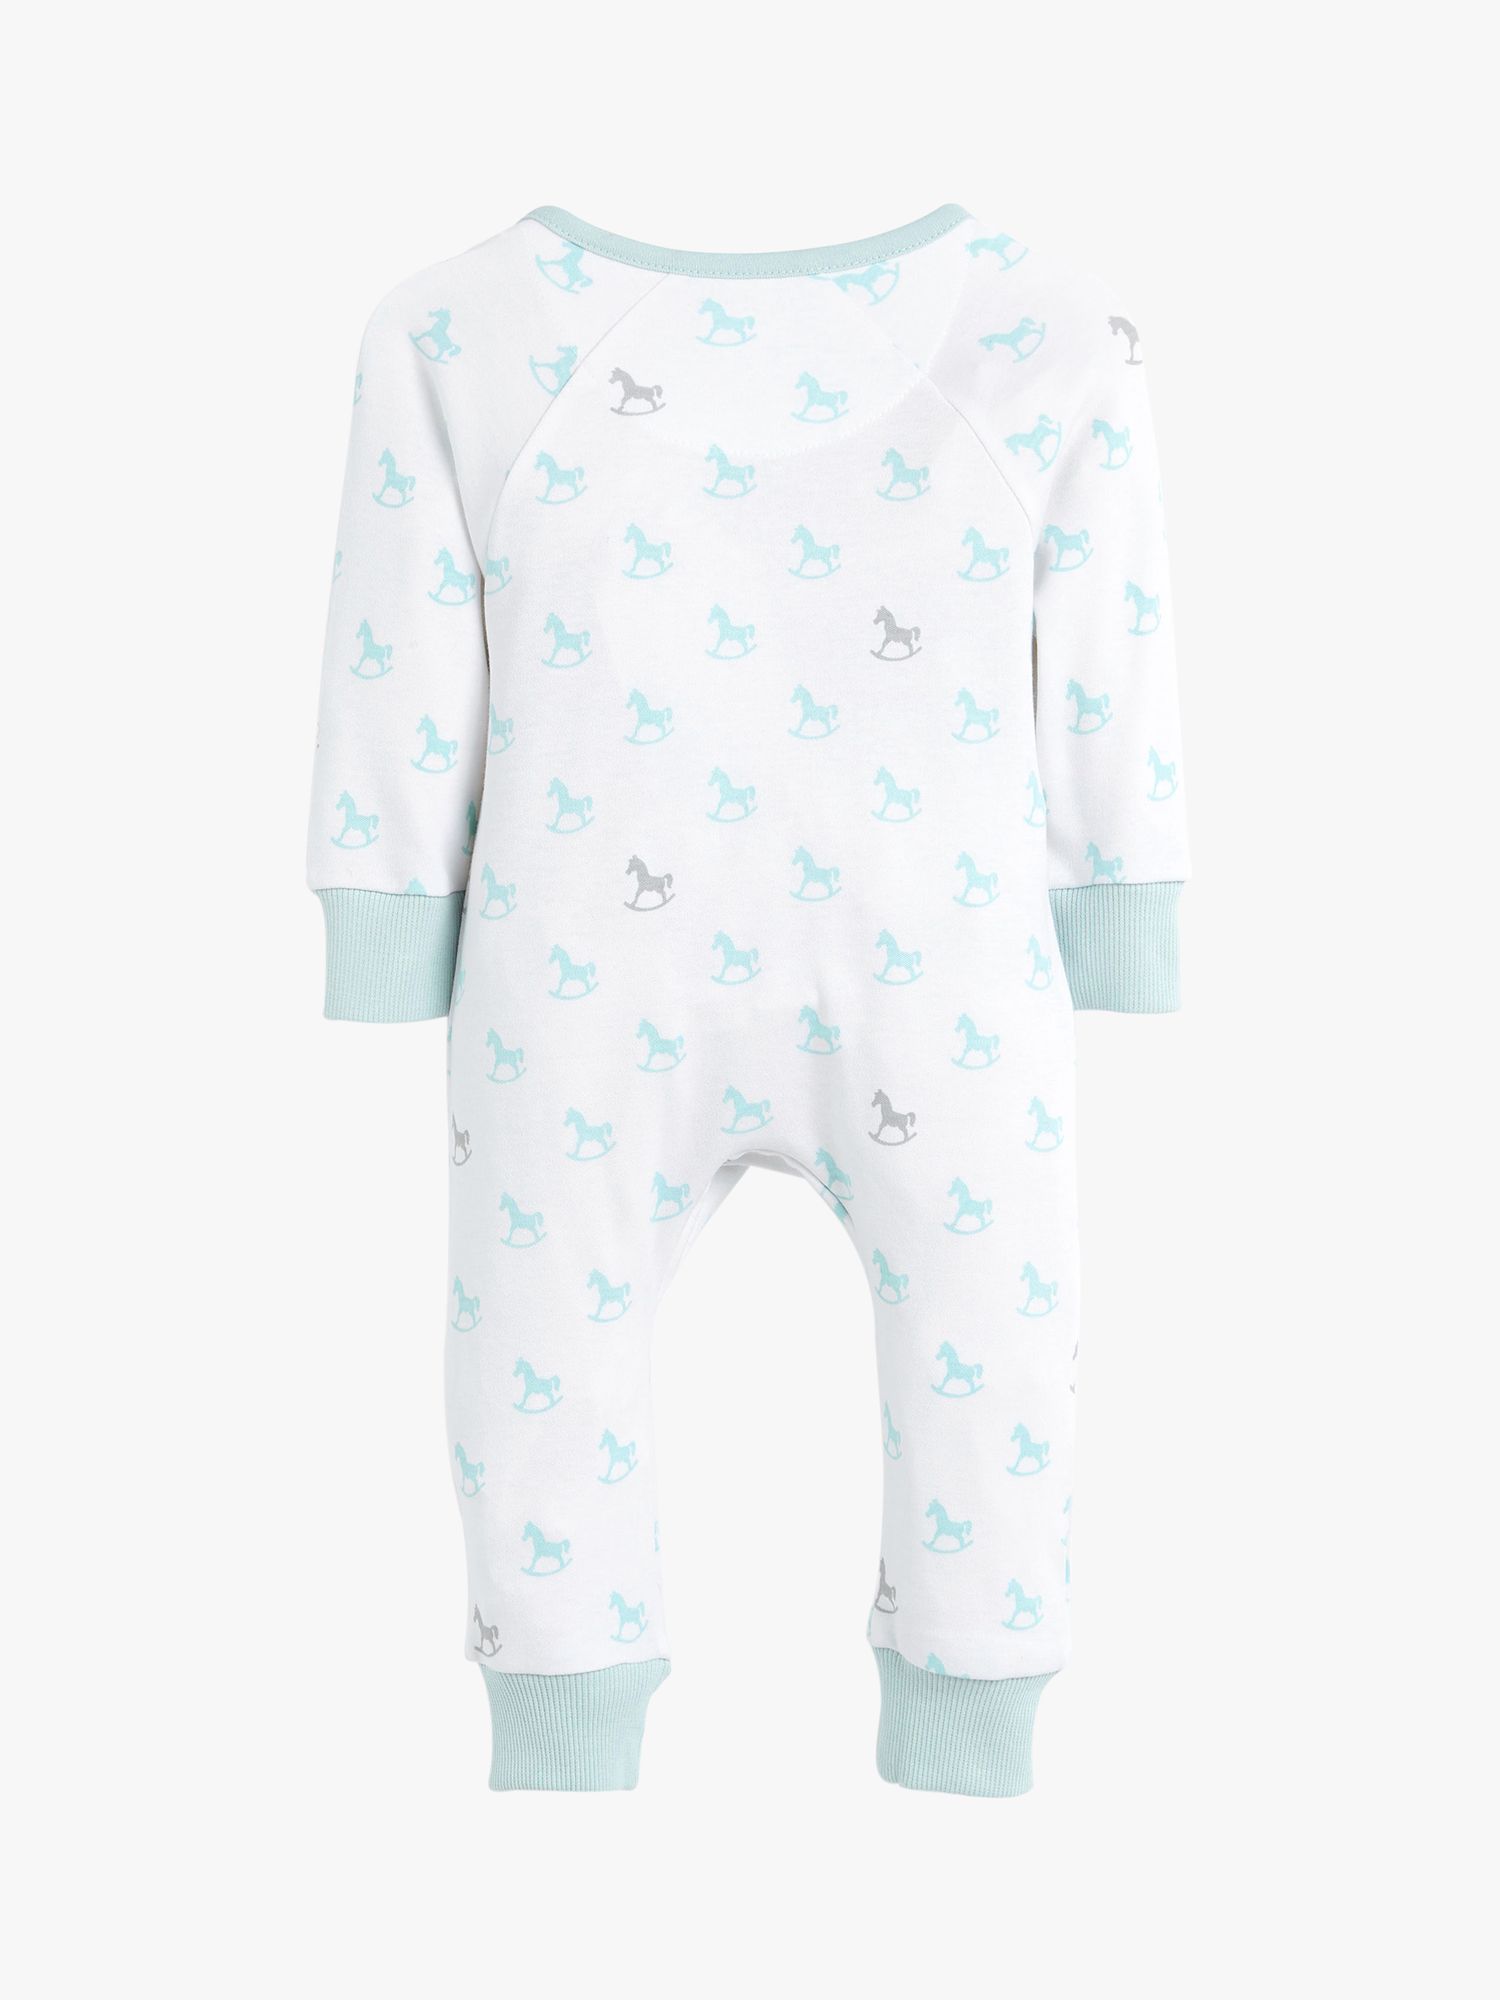 Buy The Little Tailor Baby Rocking Horse Print Cotton Jersey Slim Fit Onesie Online at johnlewis.com